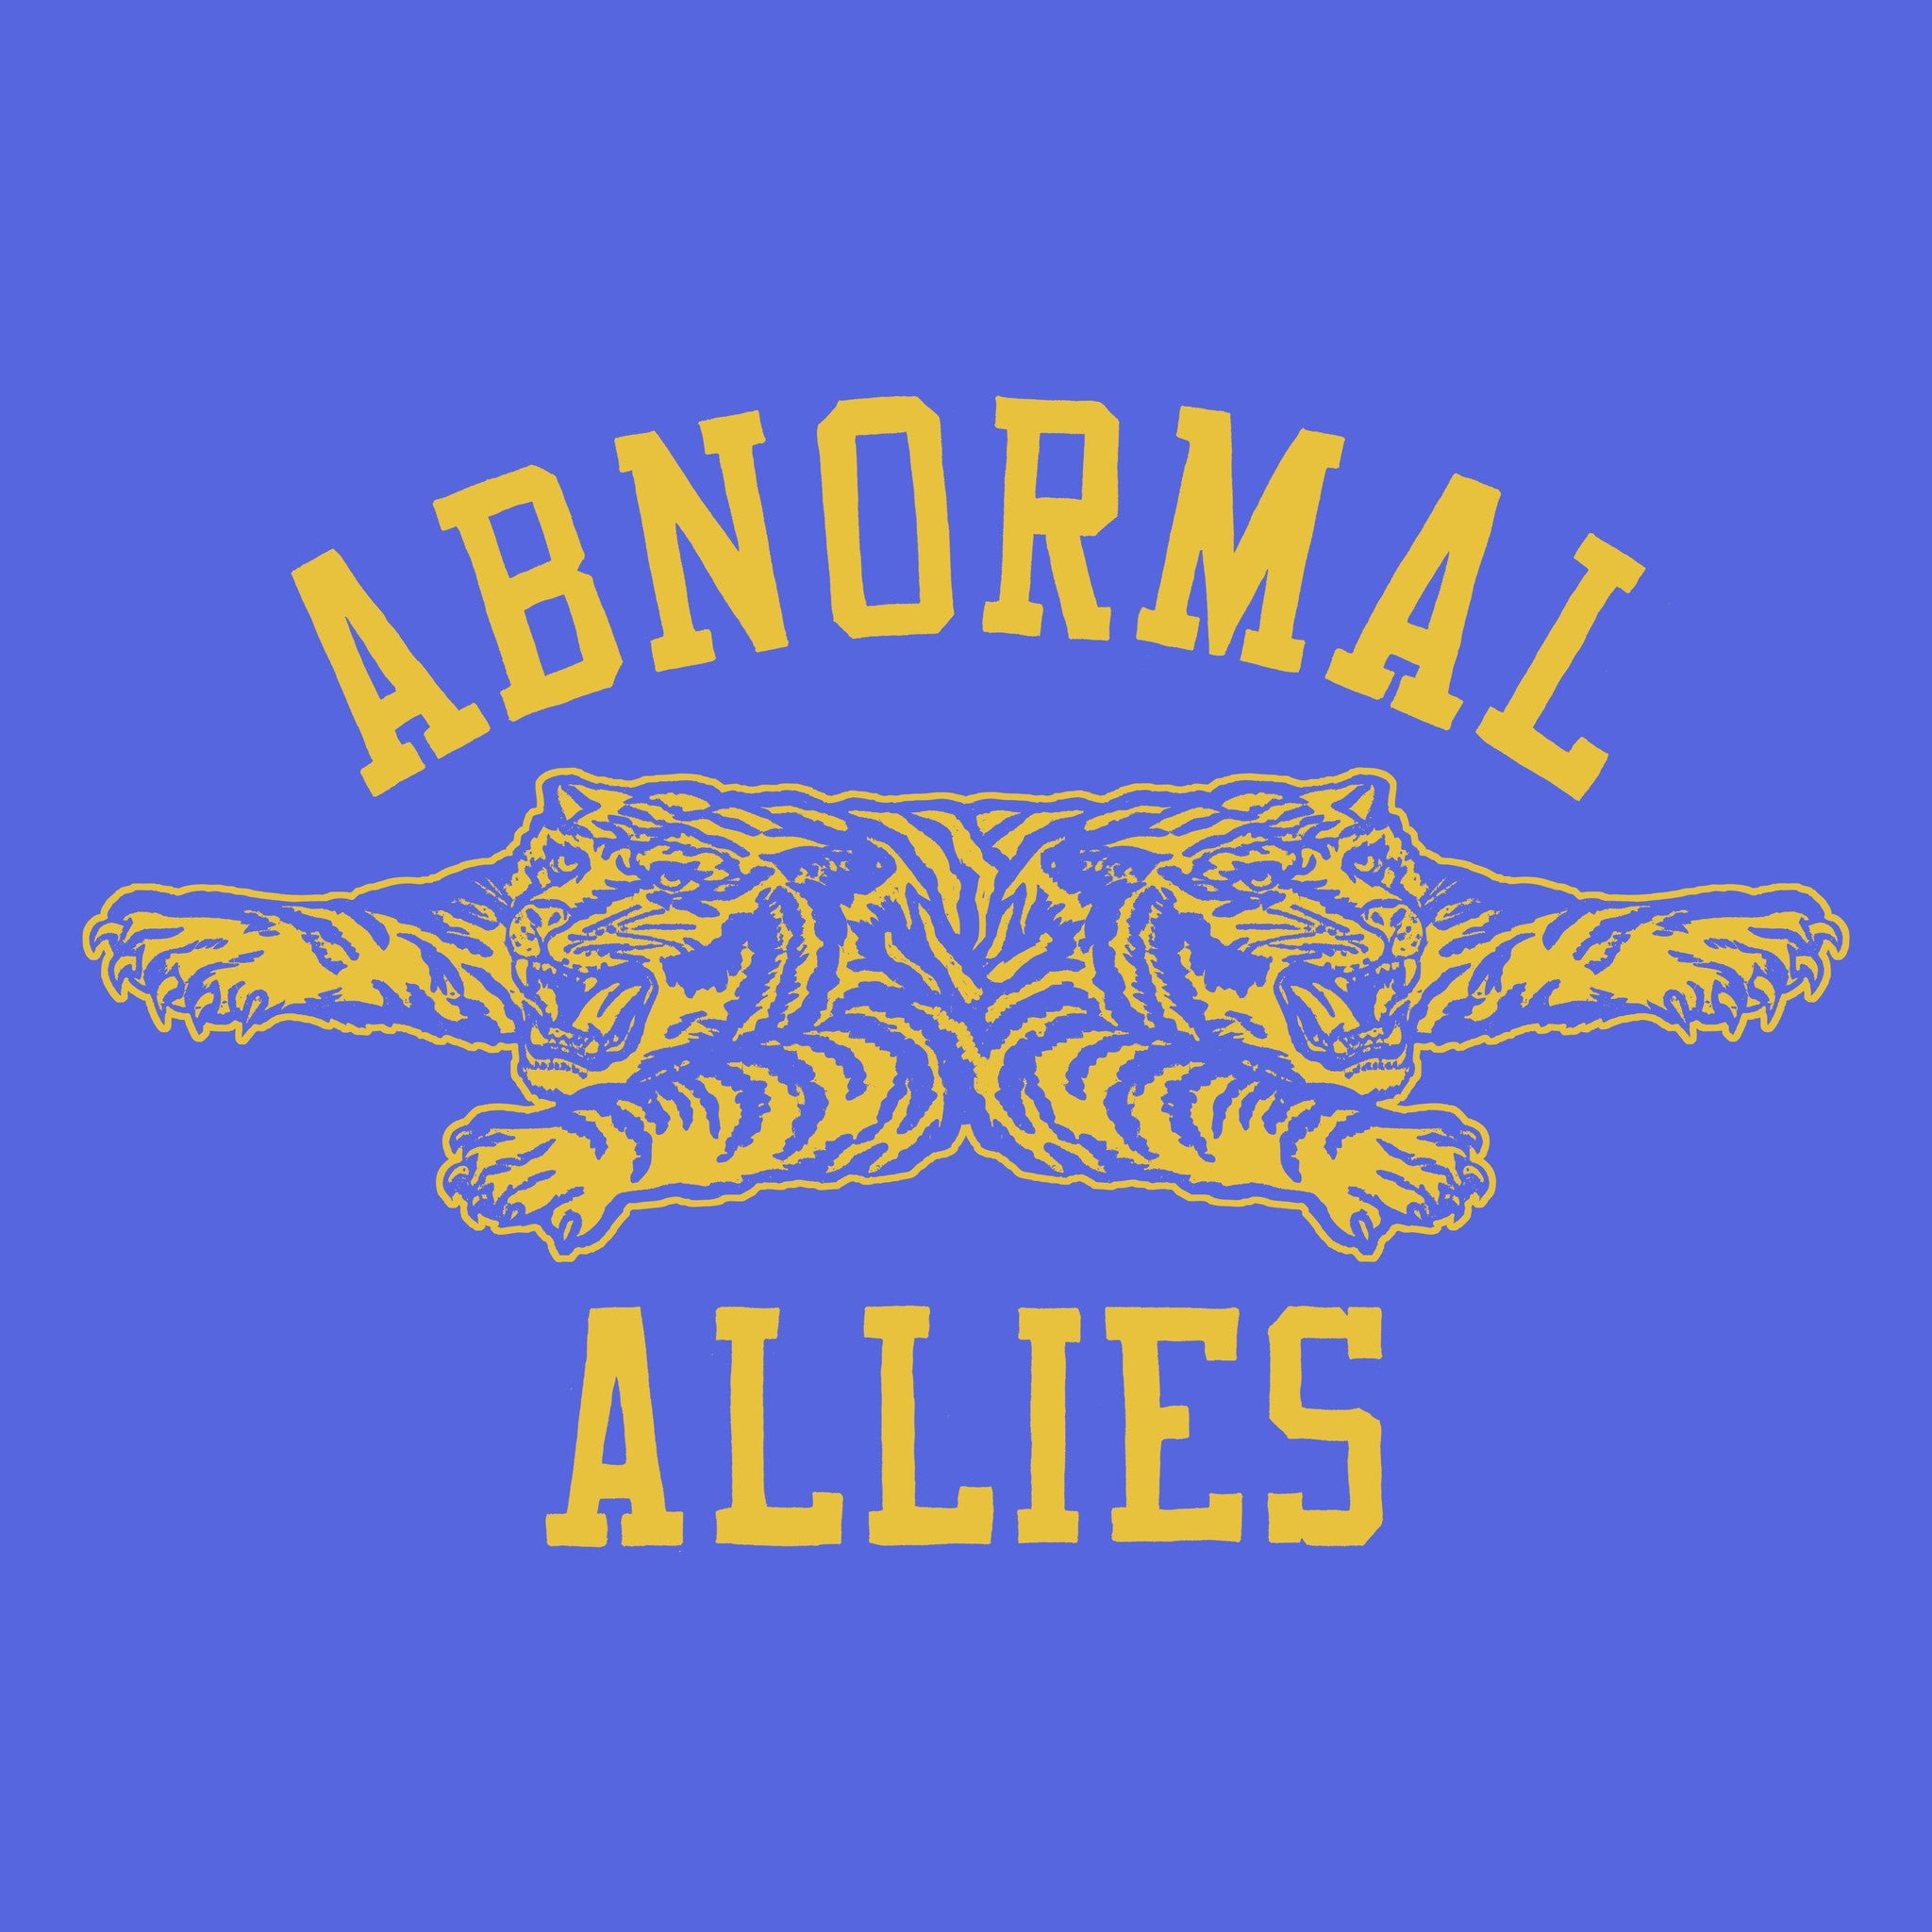 Party Party Monster Patch - Abnormal Allies